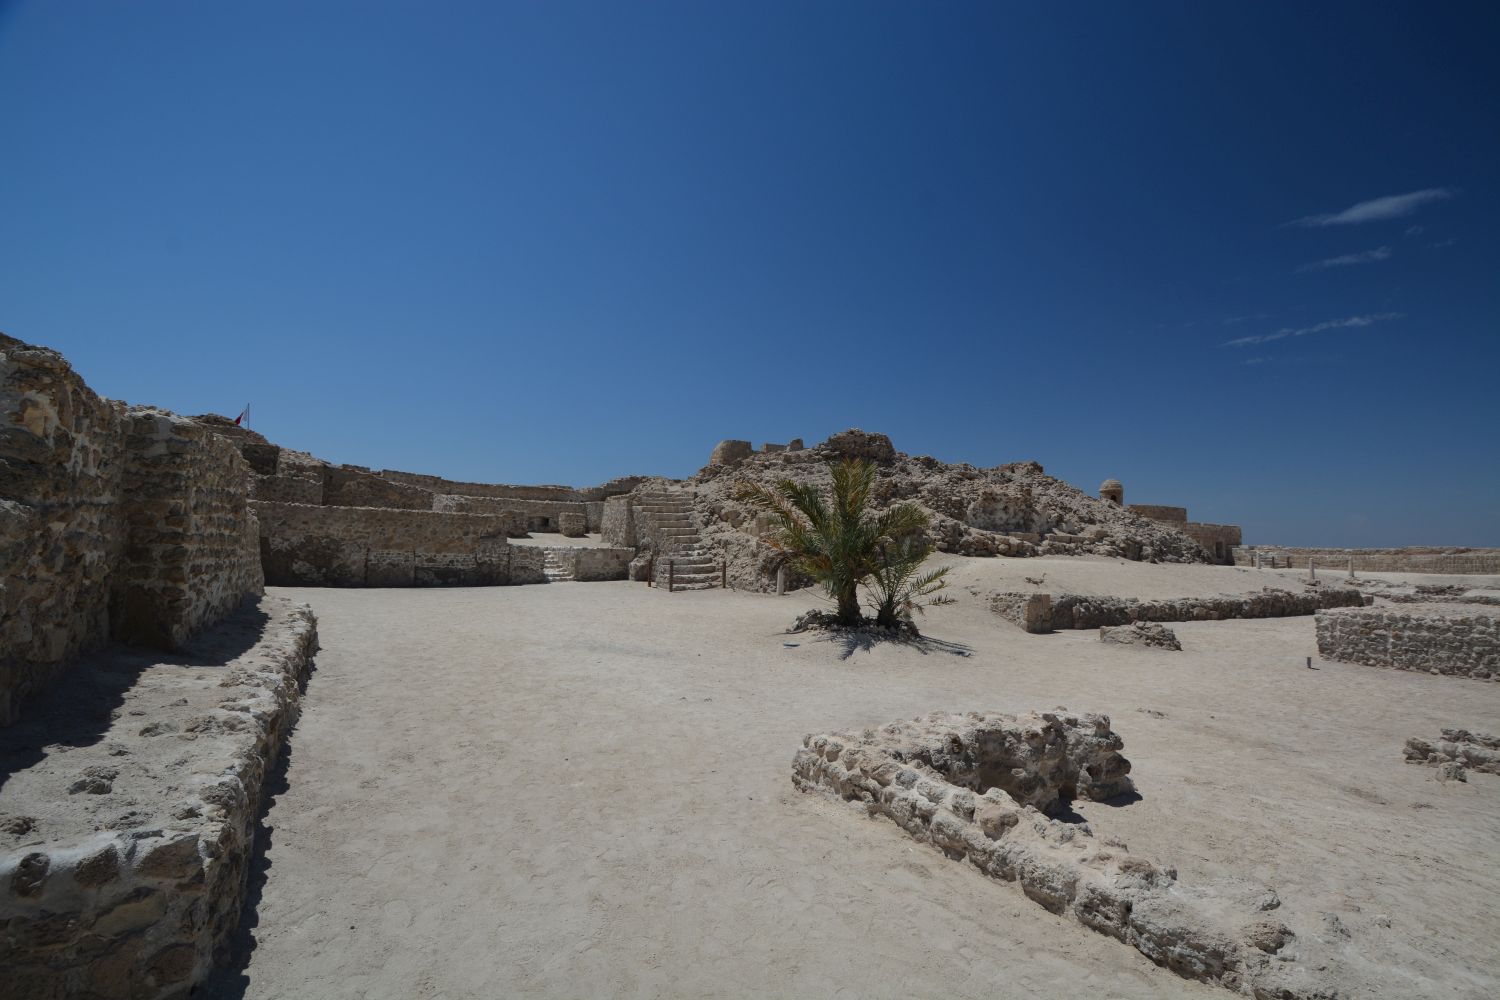 Exterior view from the archaeological site.